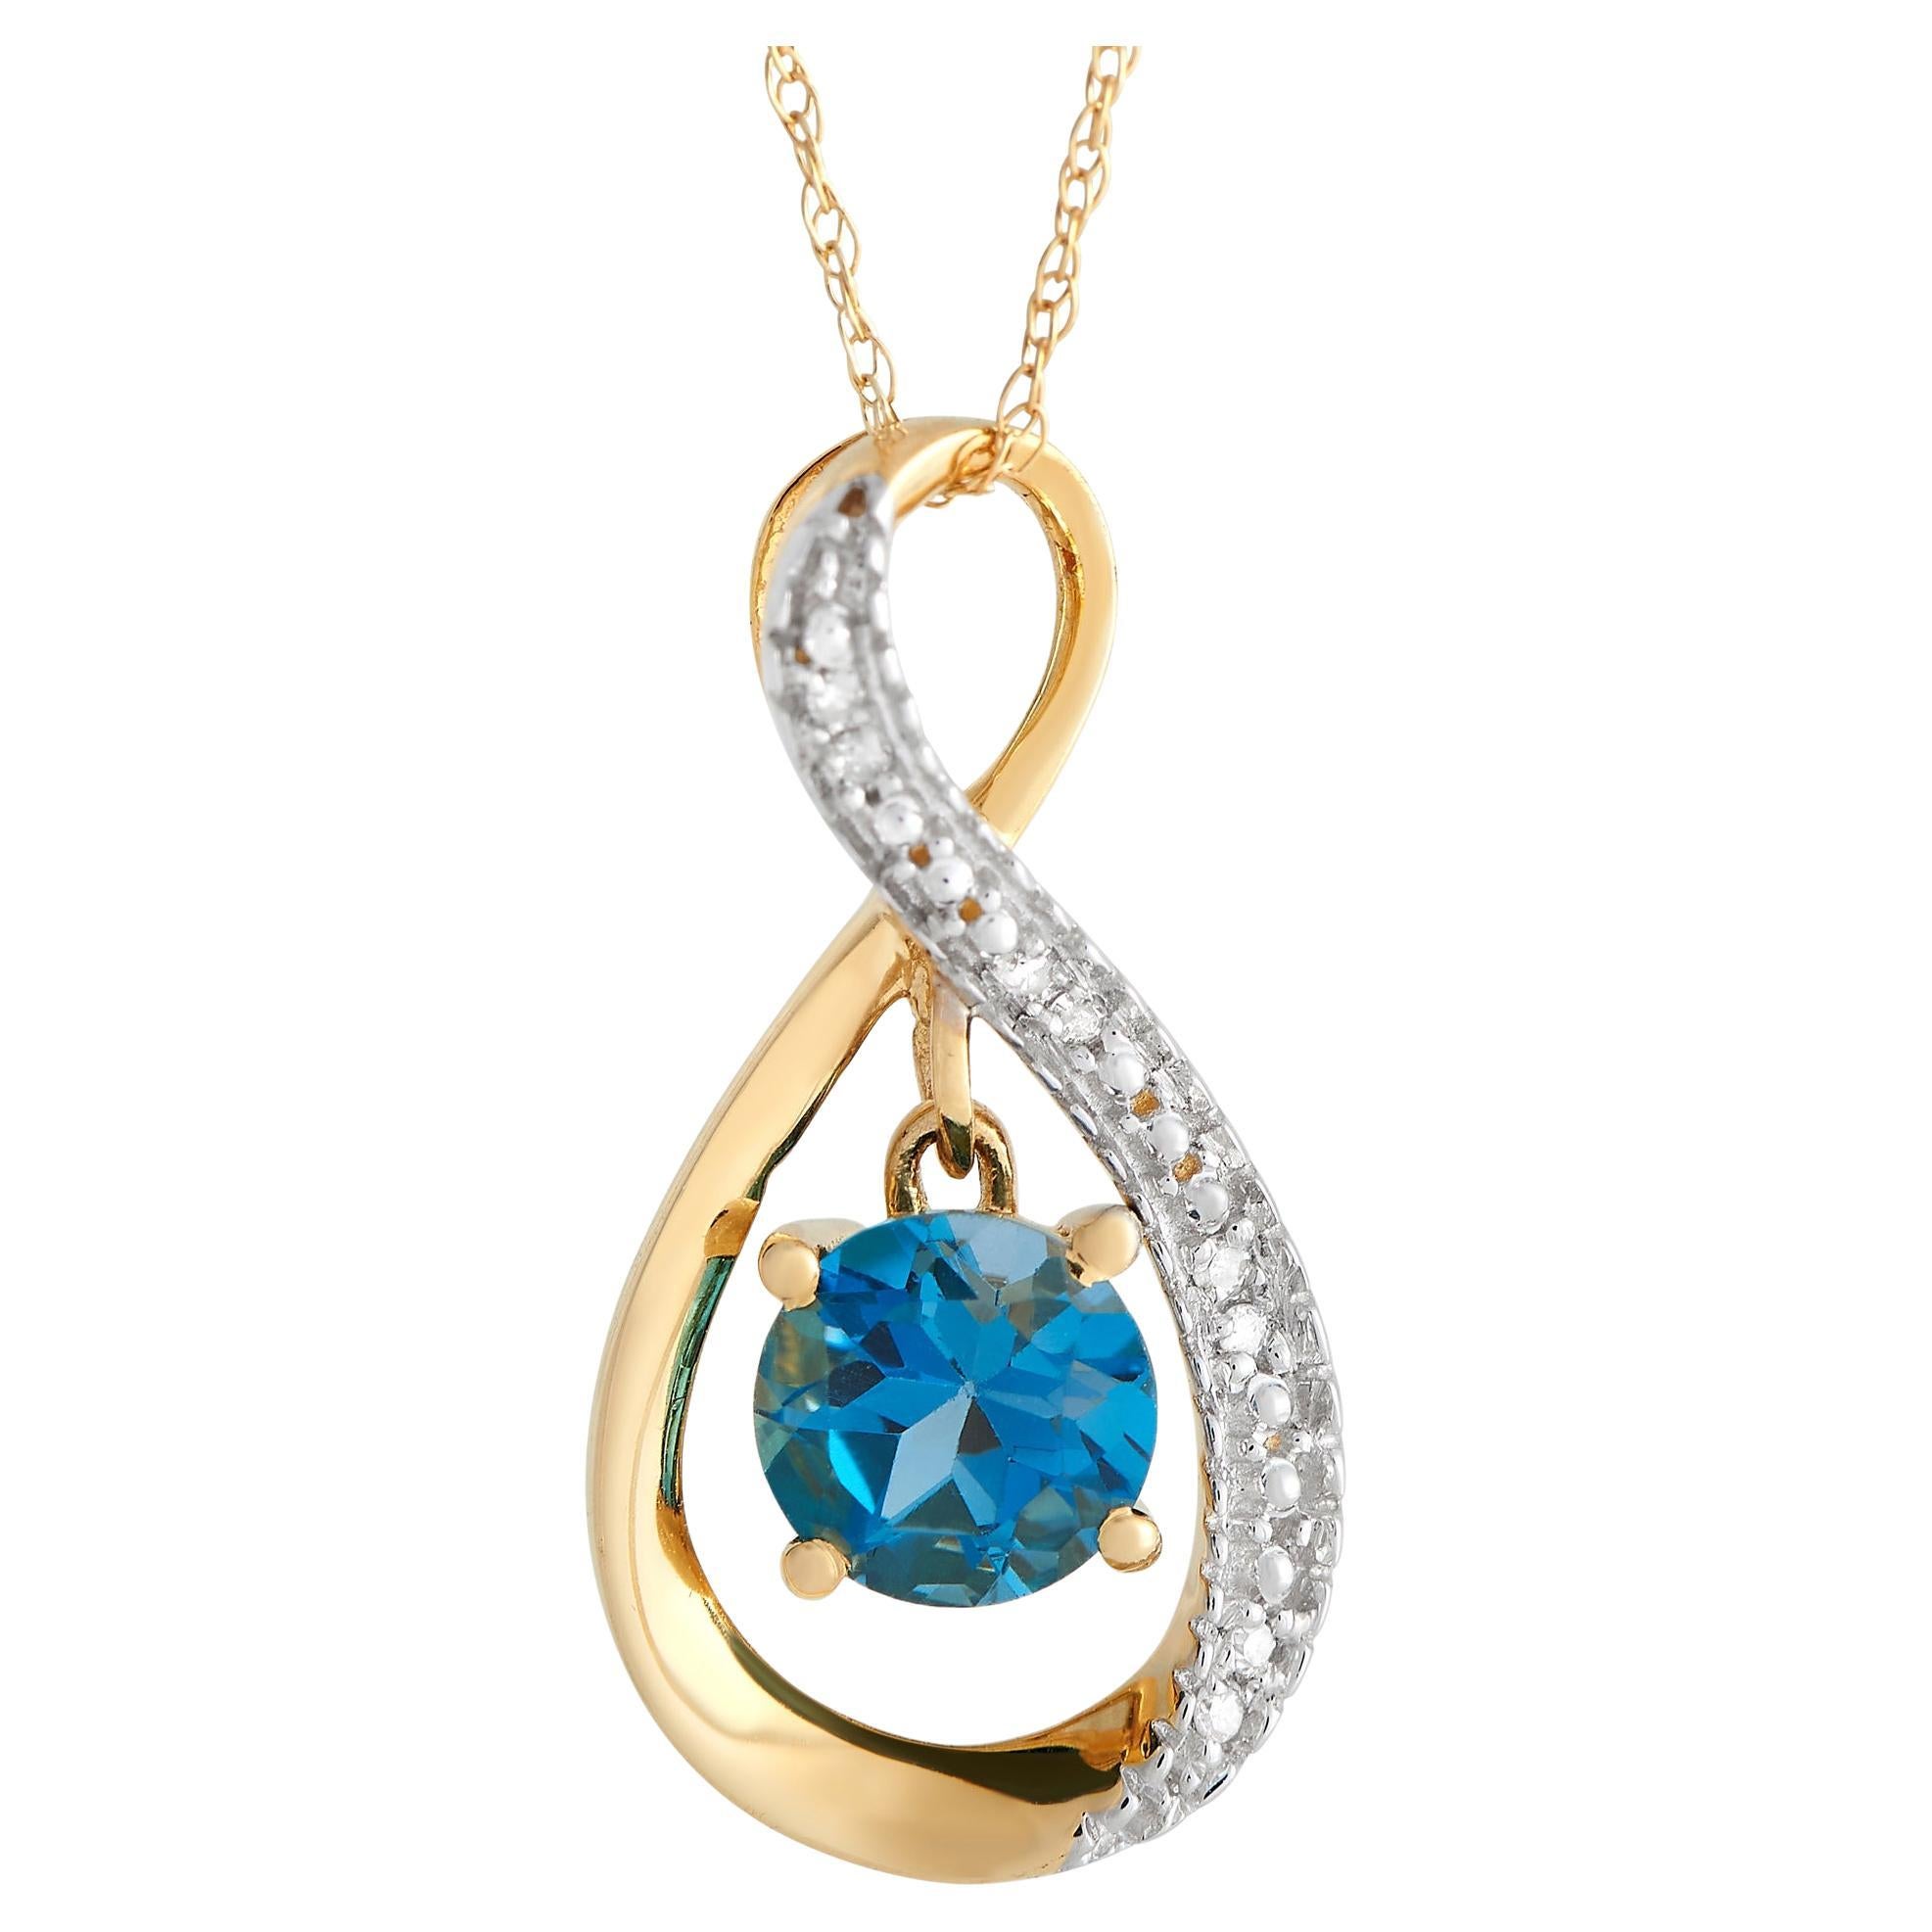 LB Exclusive 14K Yellow Gold 0.03 ct Diamond and Topaz Necklace